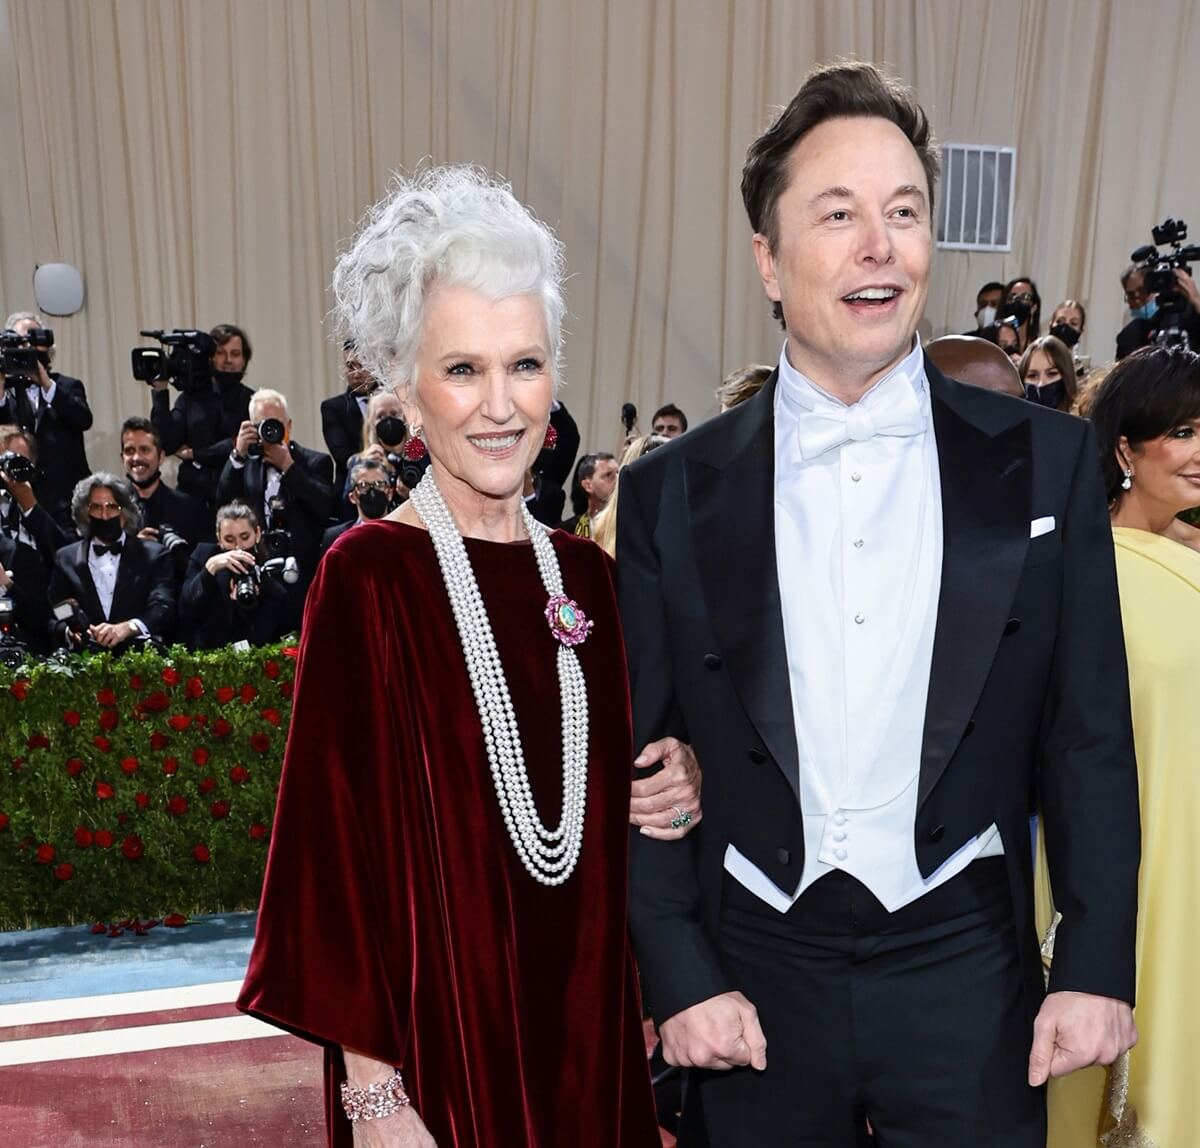 Elon Musk attend the Met Gala with his mother Maye Musk